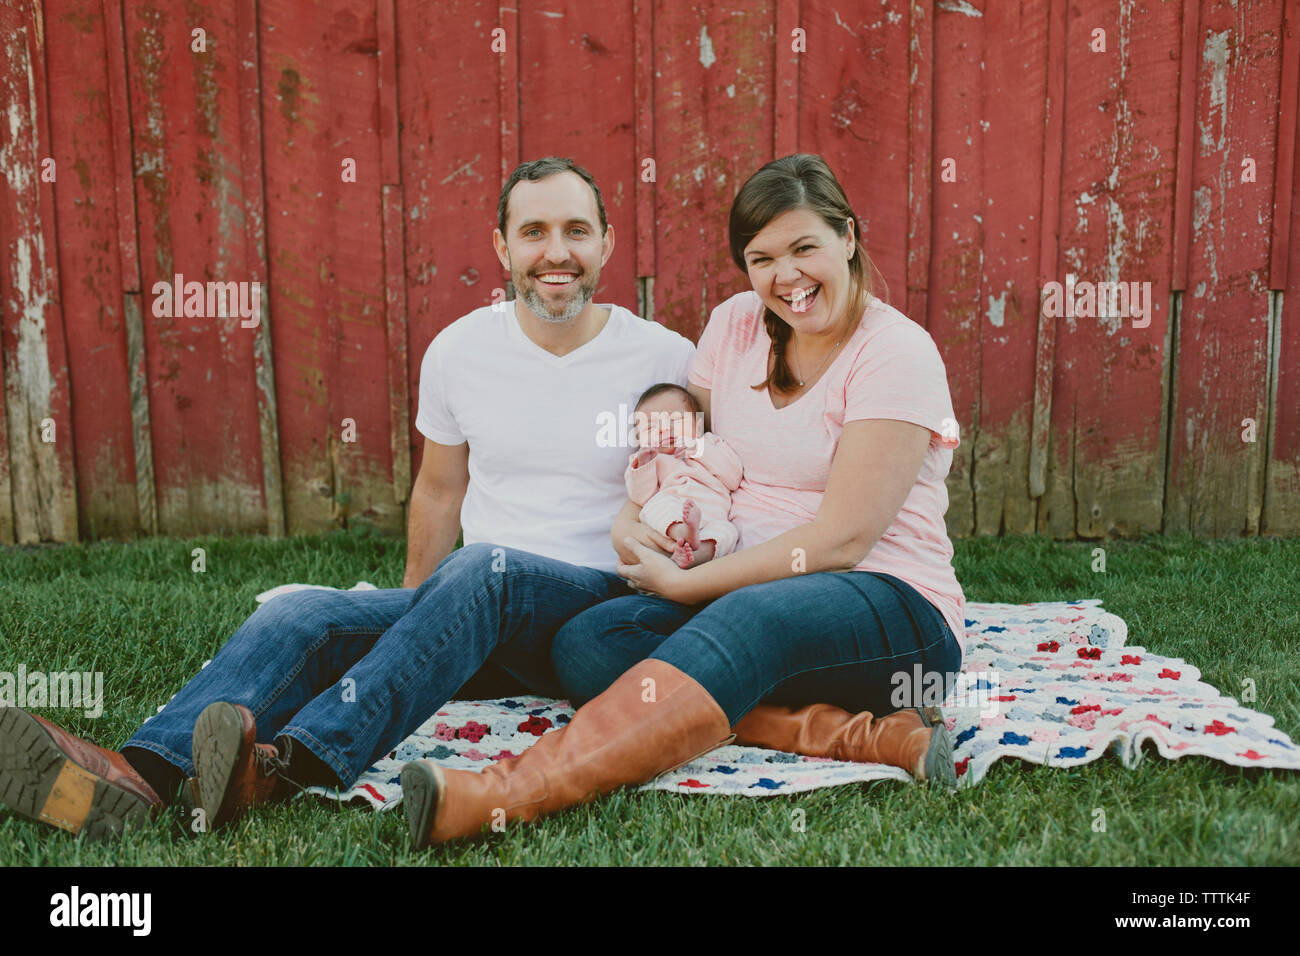 Portrait of happy mother and father with baby girl sitting on field in yard Banque D'Images